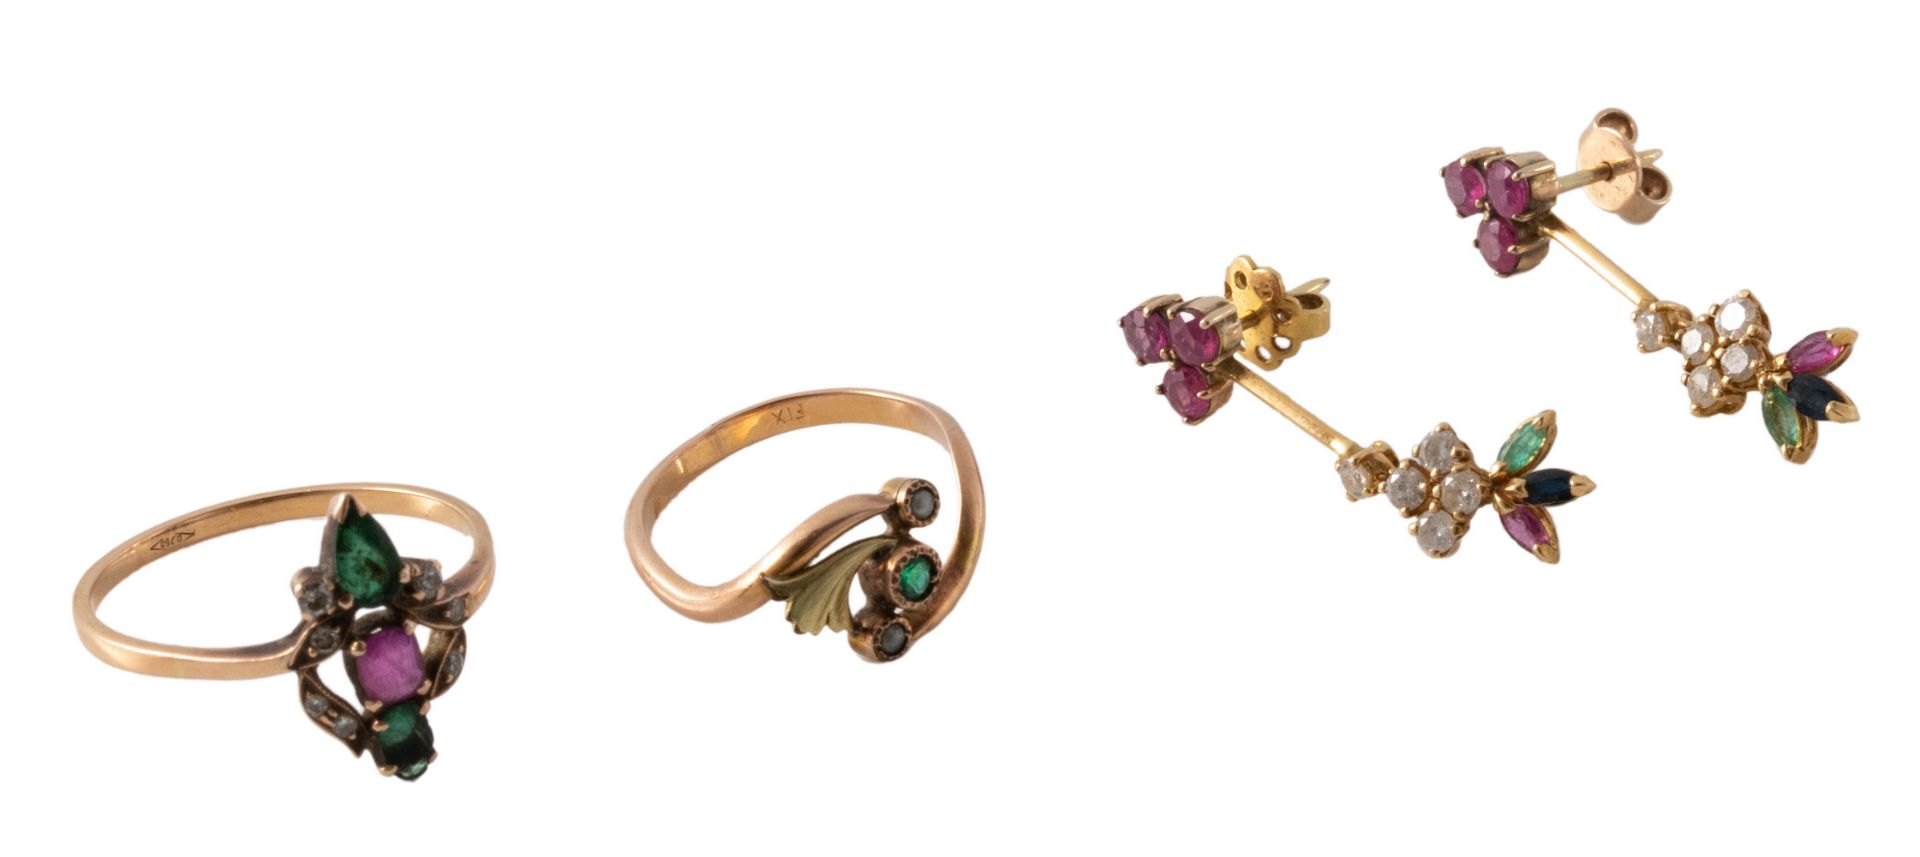 A three-part 18ct golden set of a pair of earrings and a ring, all set with ruby, emerald and